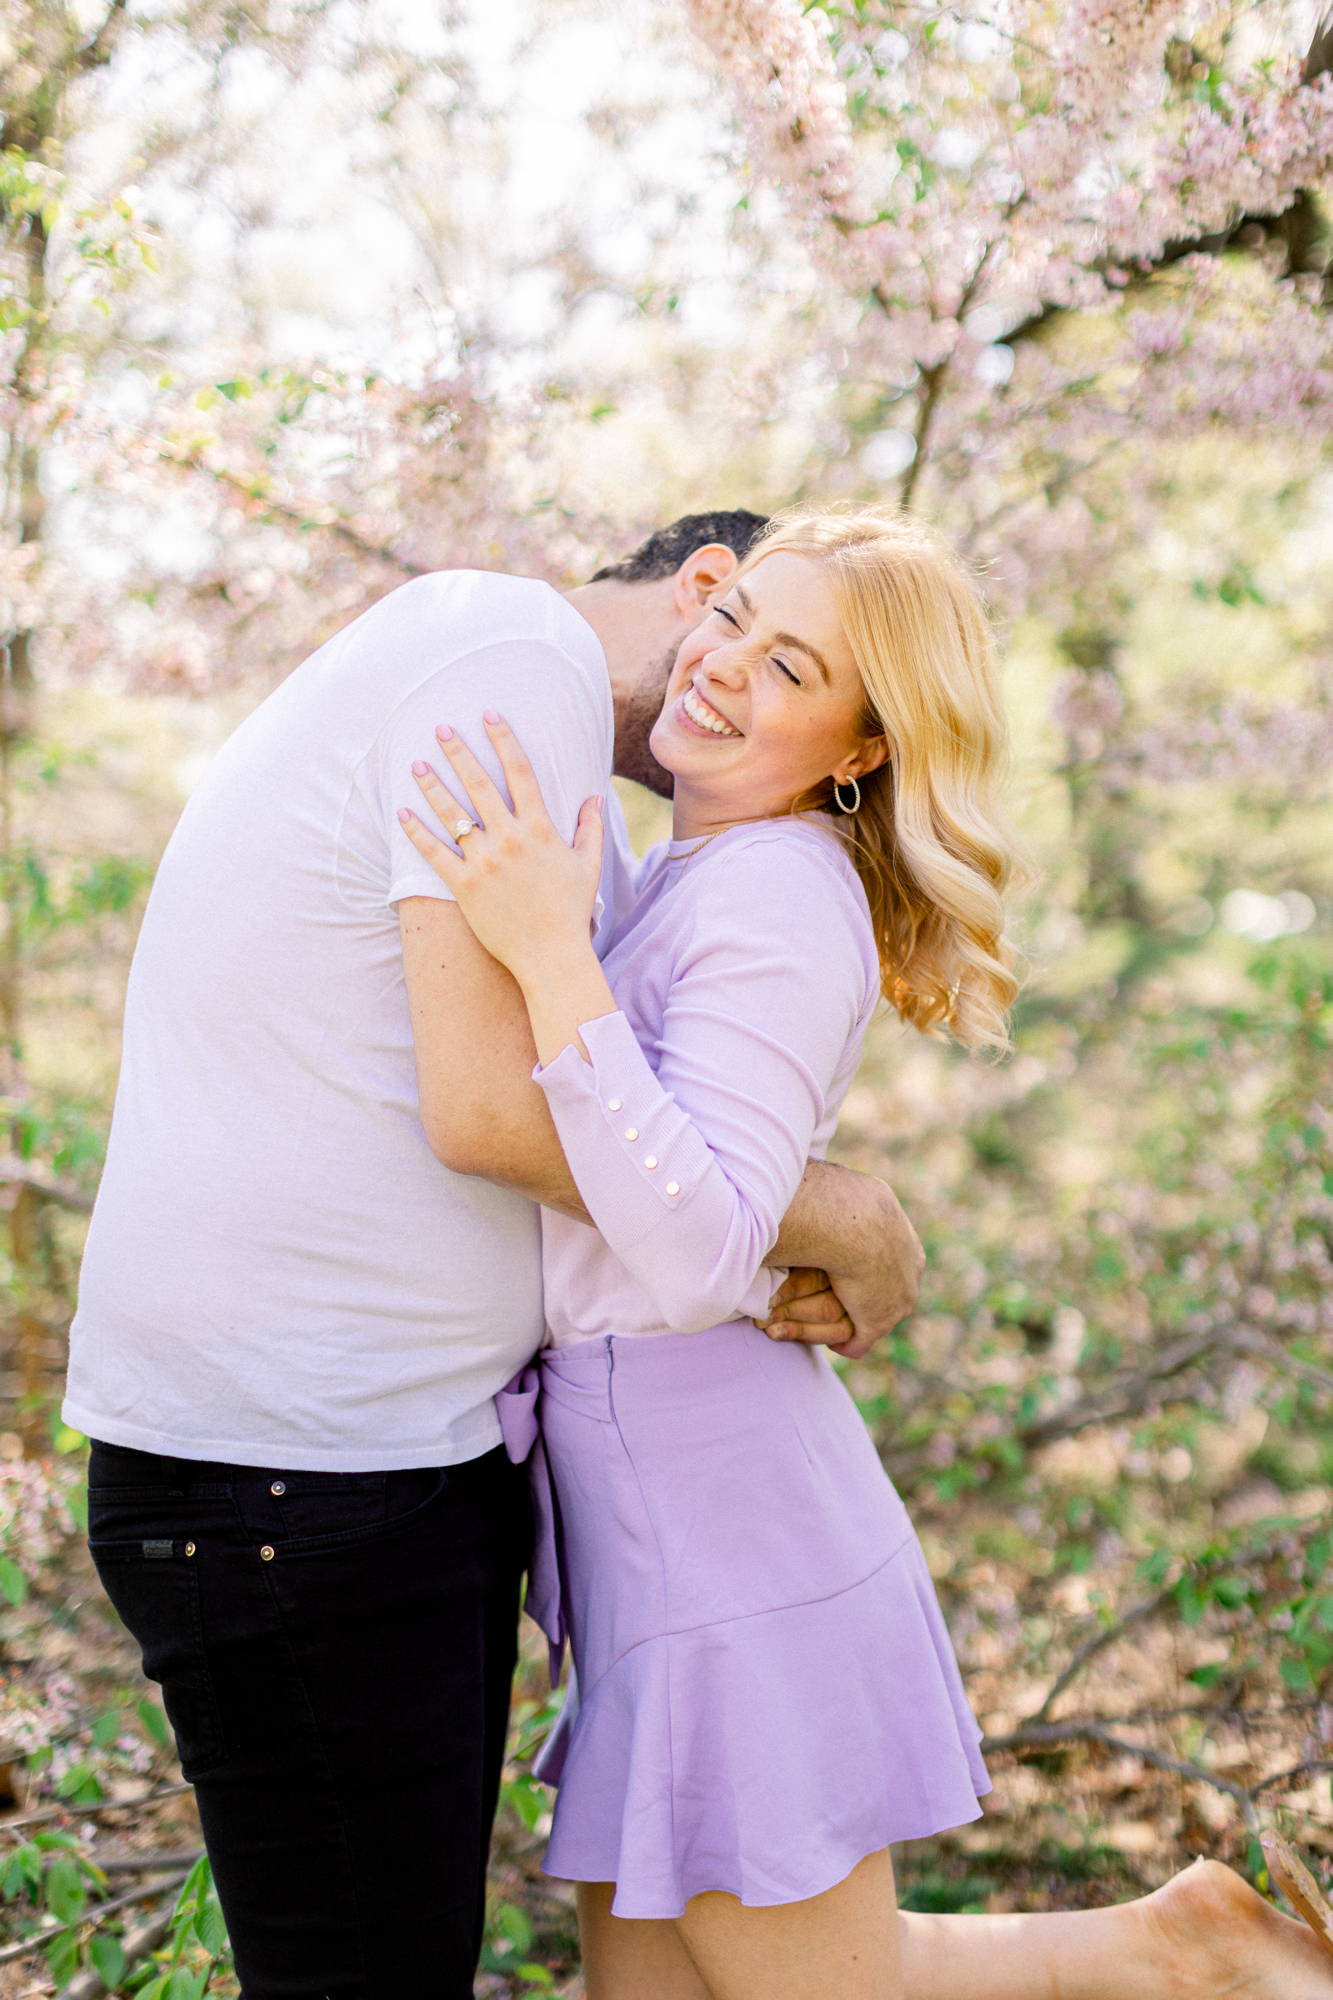 Light NYC Engagement Photography with Spring Blossoms